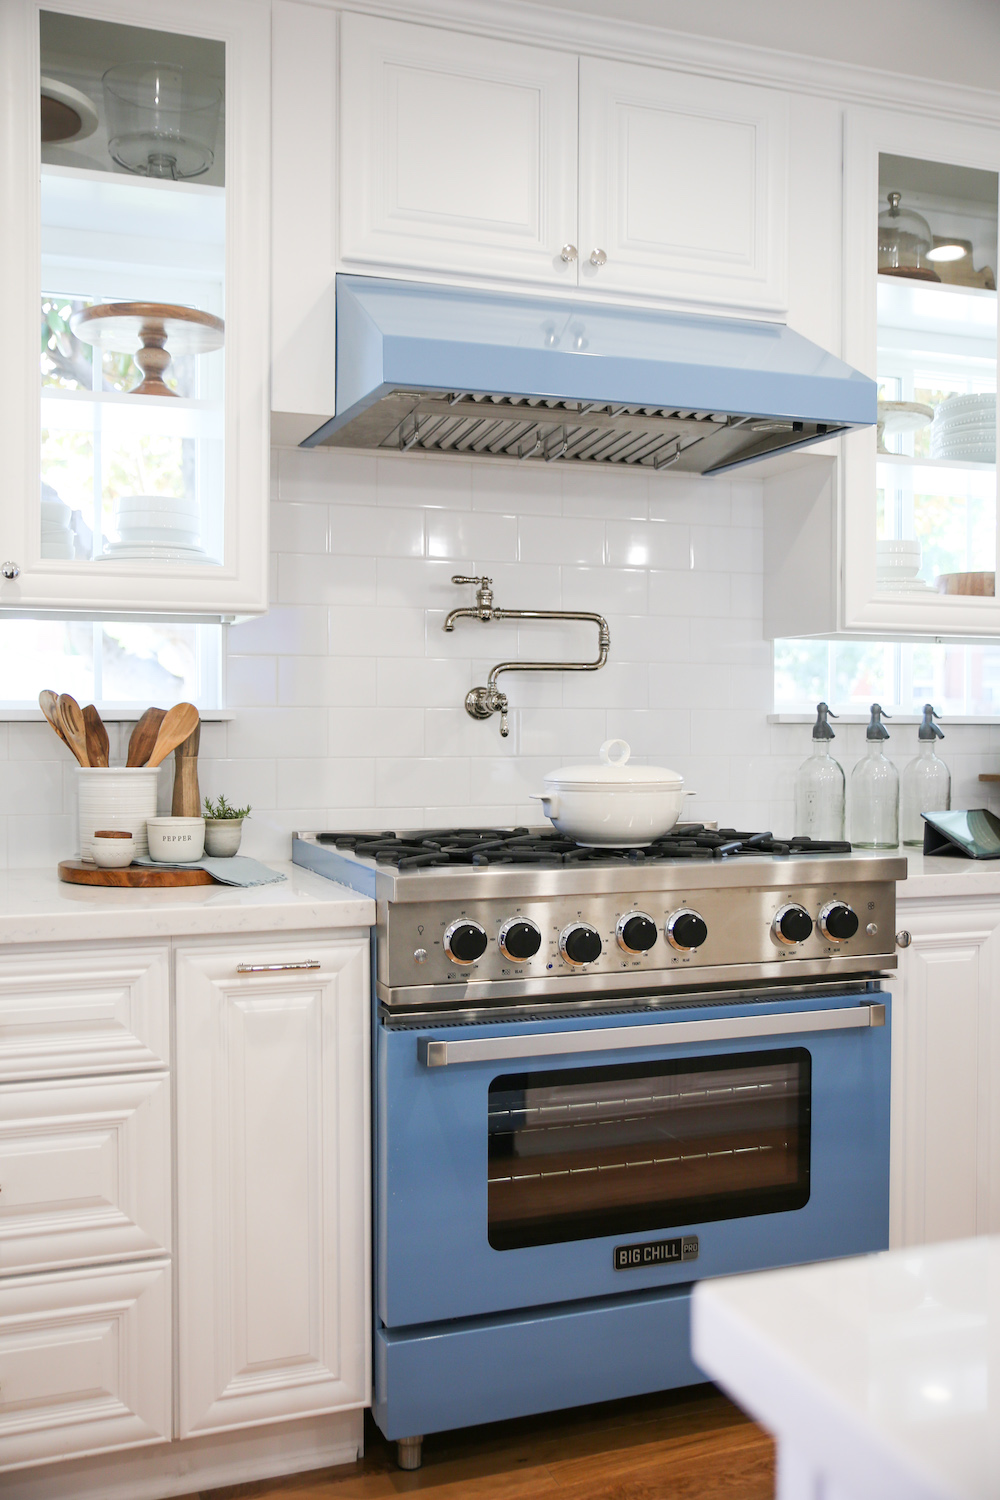 Baby blue appliances from Best Buy